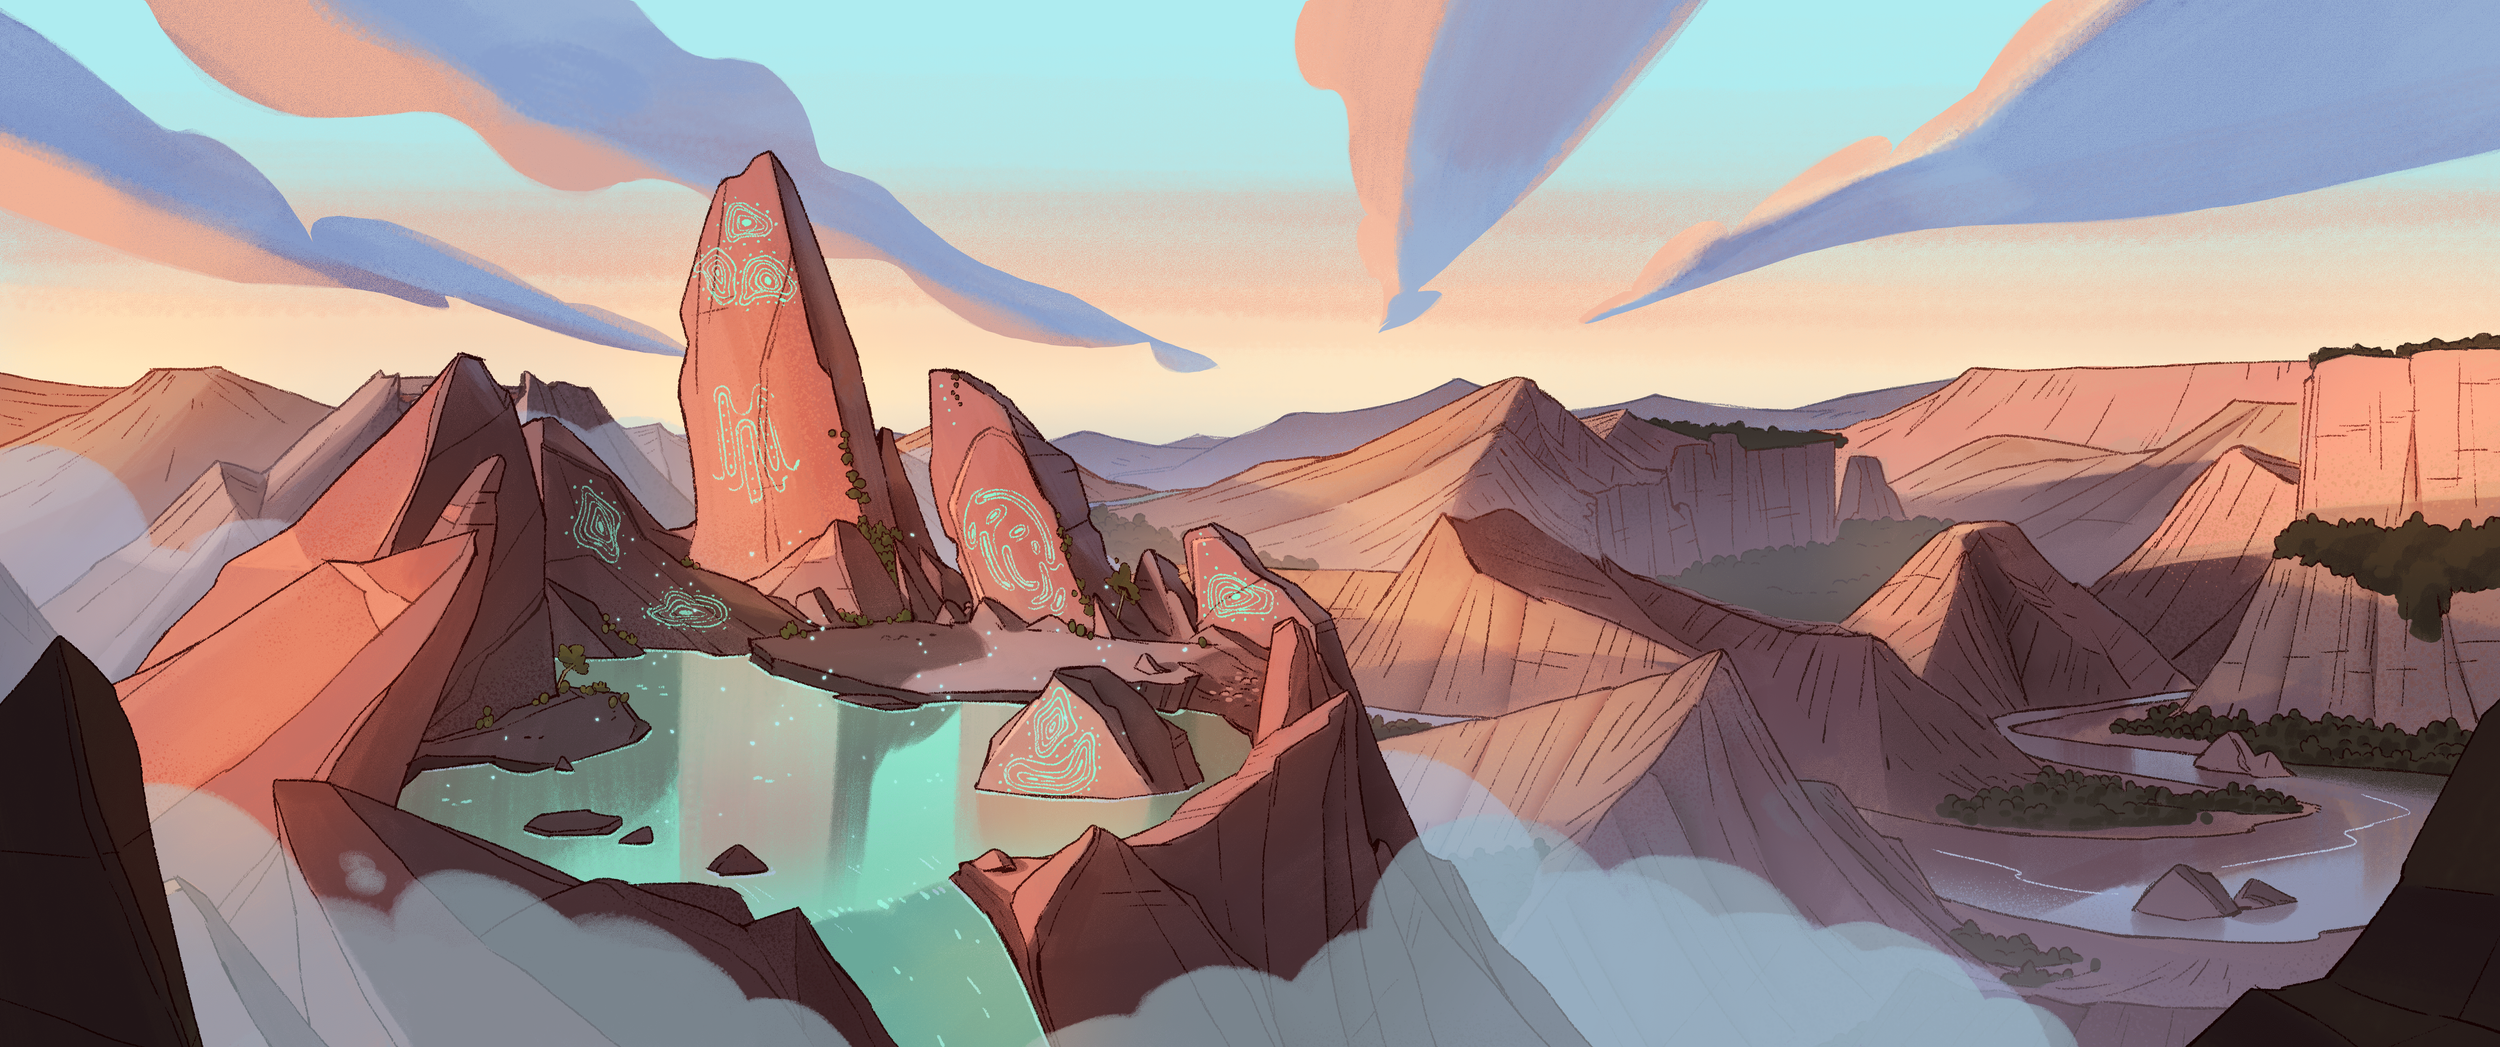 MOUNTAIN_WIDE_PAINT_V03-min.png